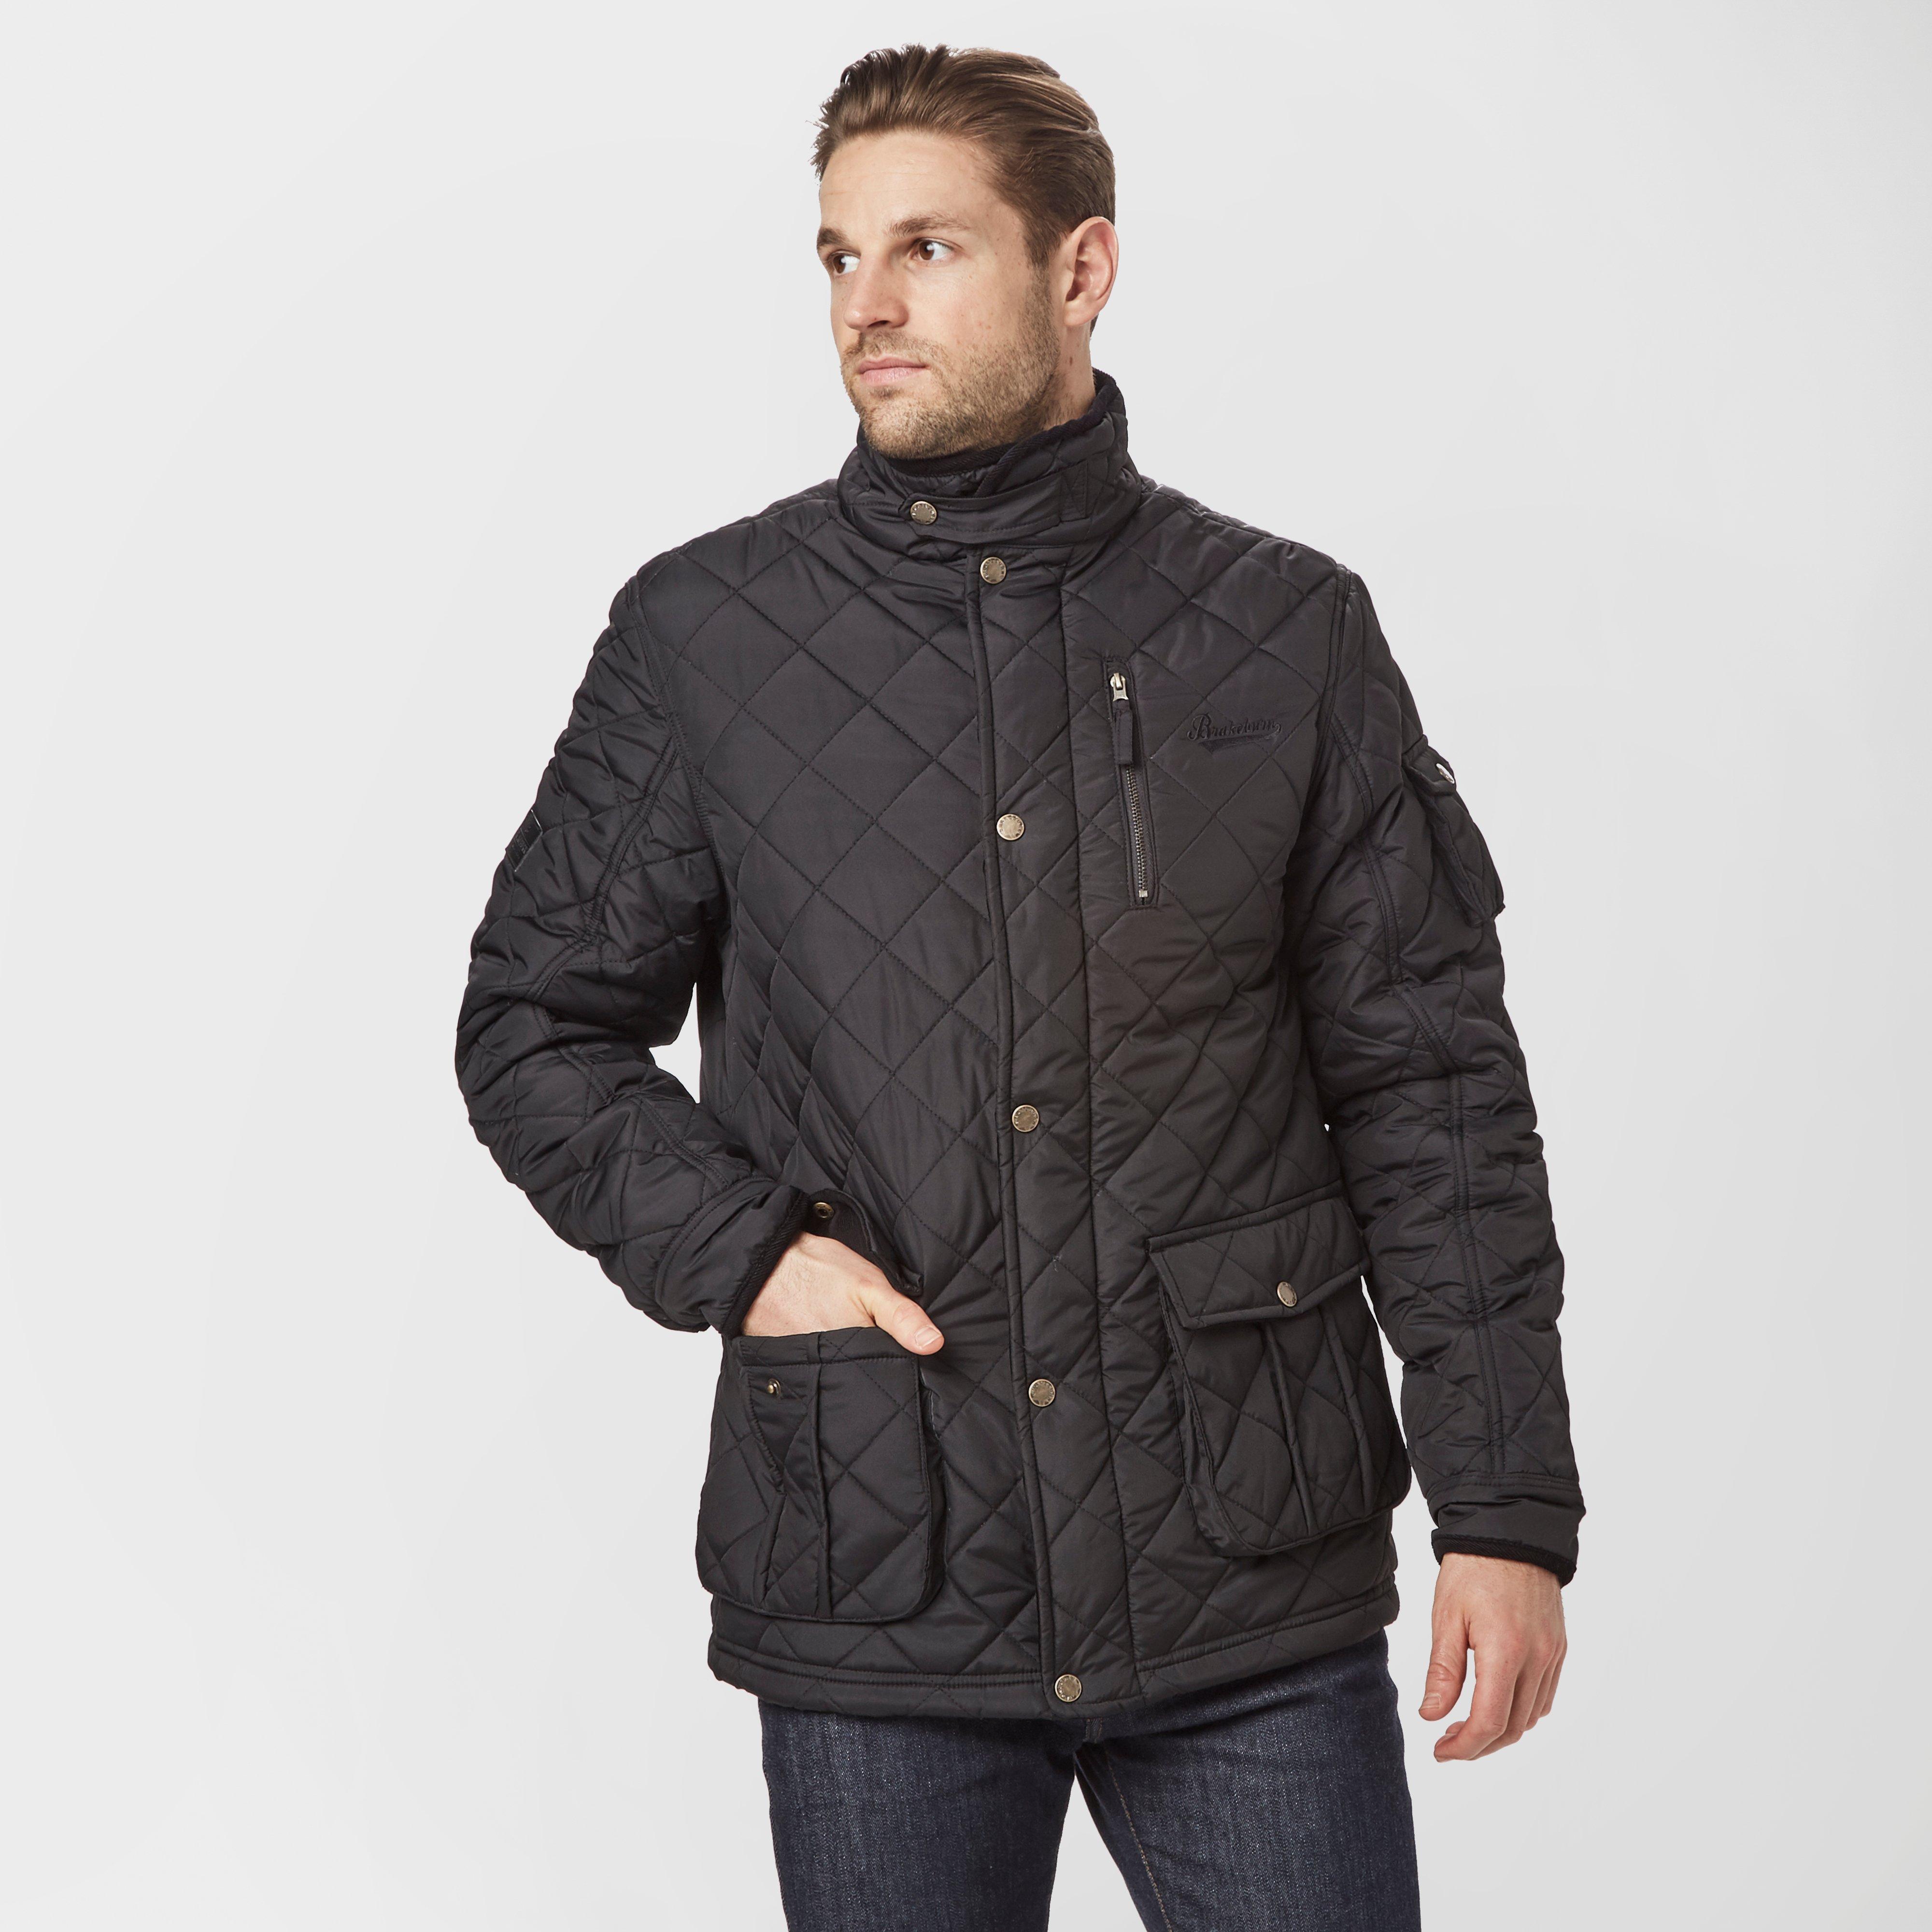 Brakeburn Quilted Jacket – Men’s | Jacket Compare – Compare outdoor ...